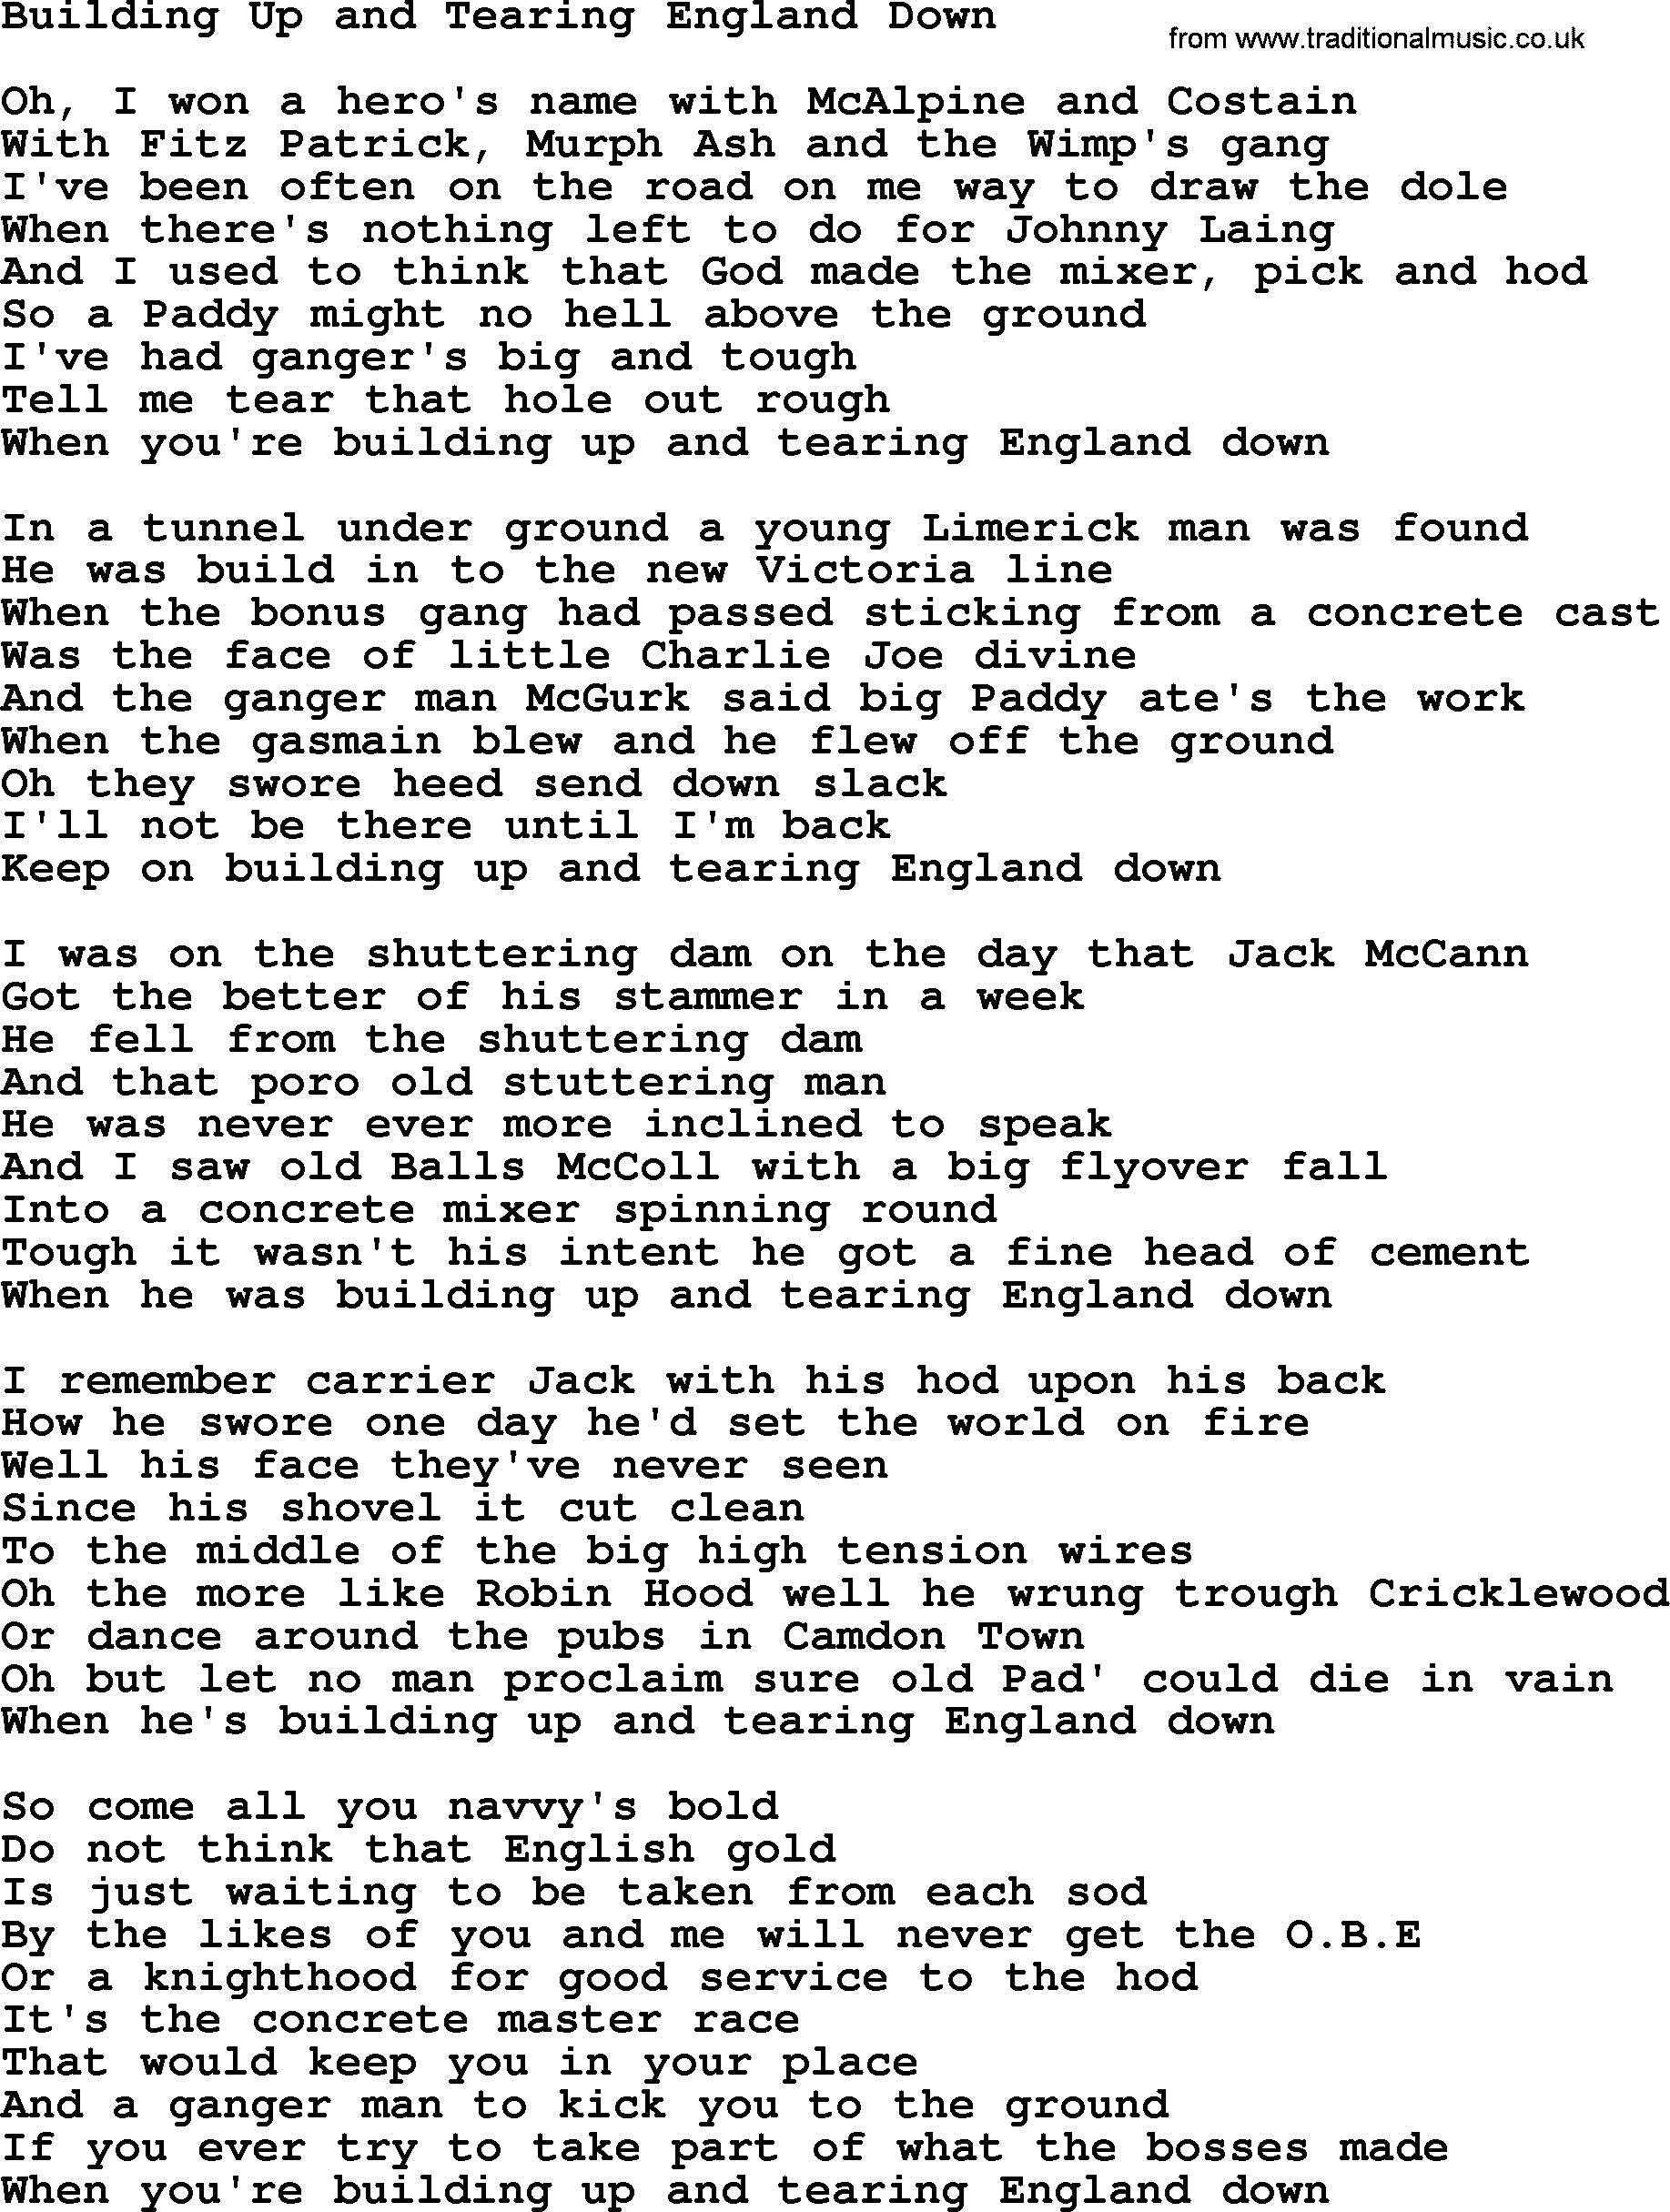 The Dubliners song: Building Up And Tearing England Down, lyrics